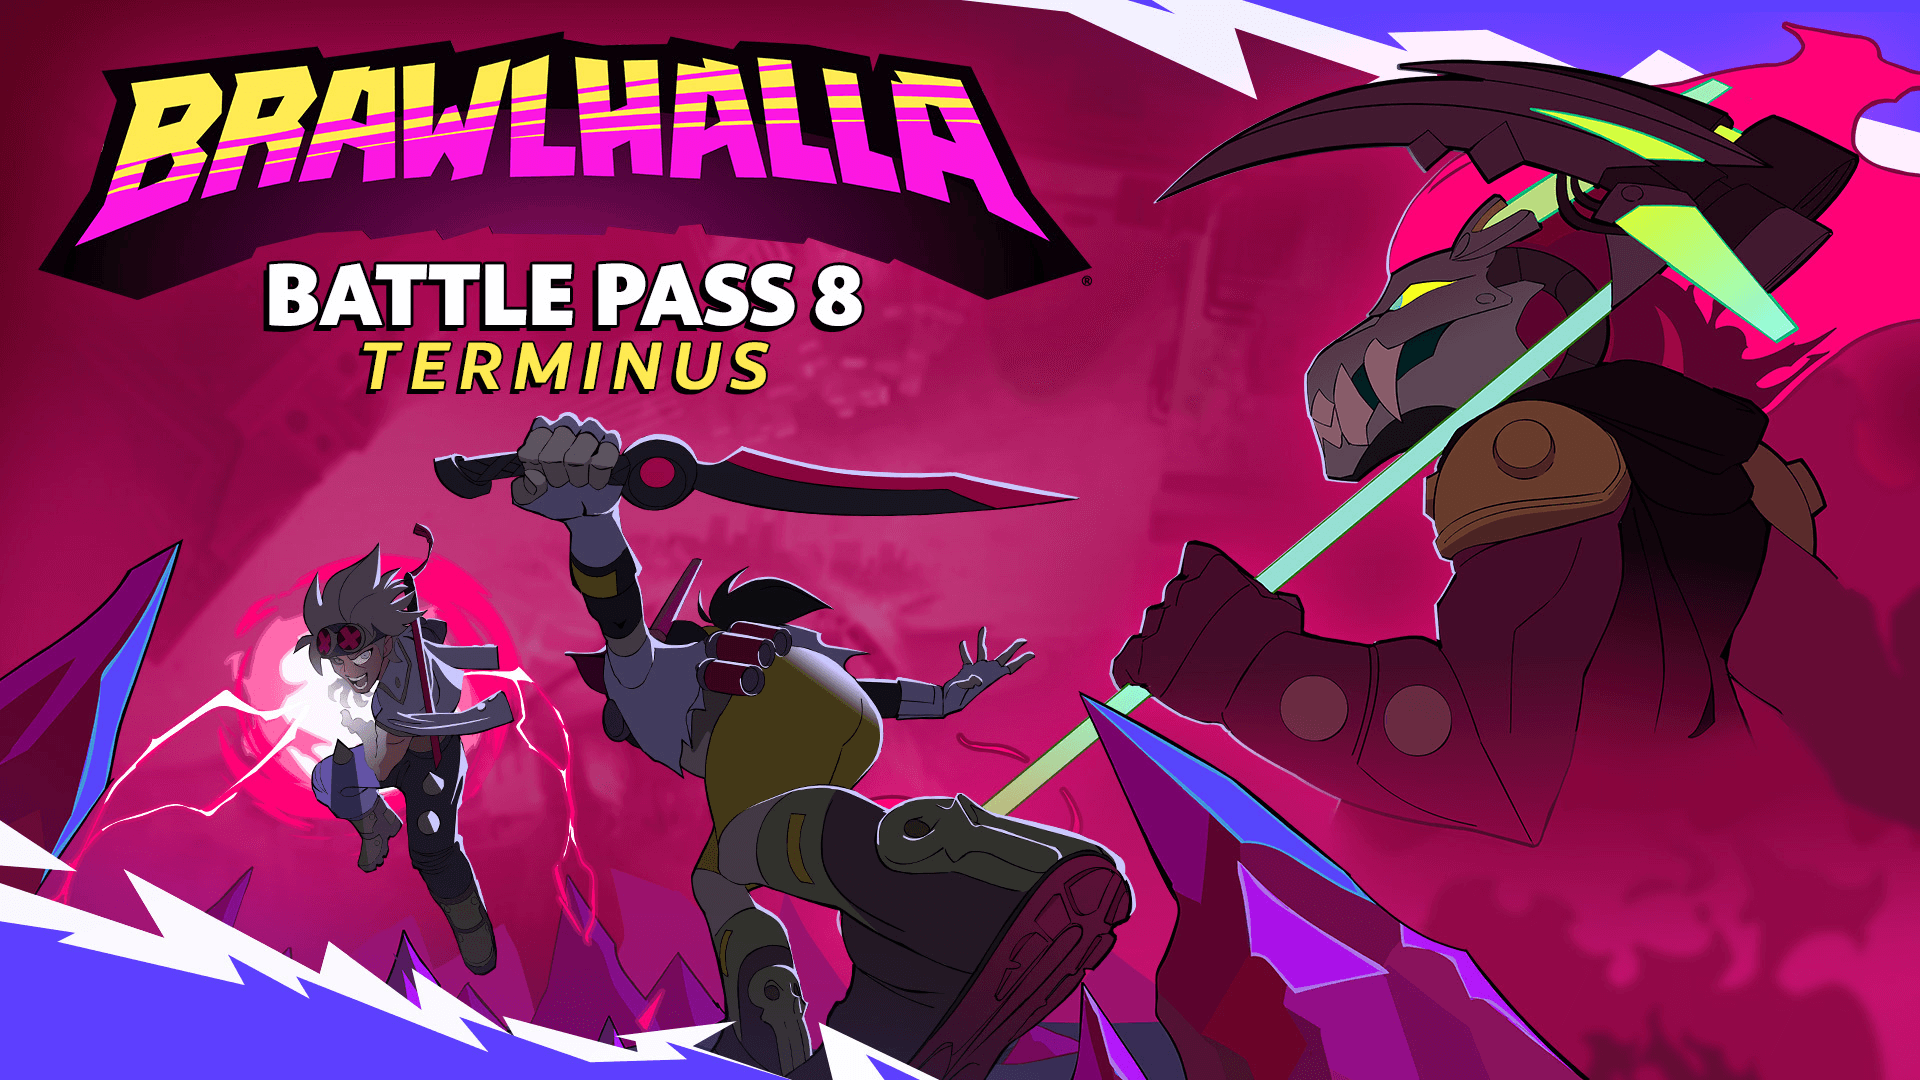 Brawlhalla Battle Pass 8 Terminus is Here!